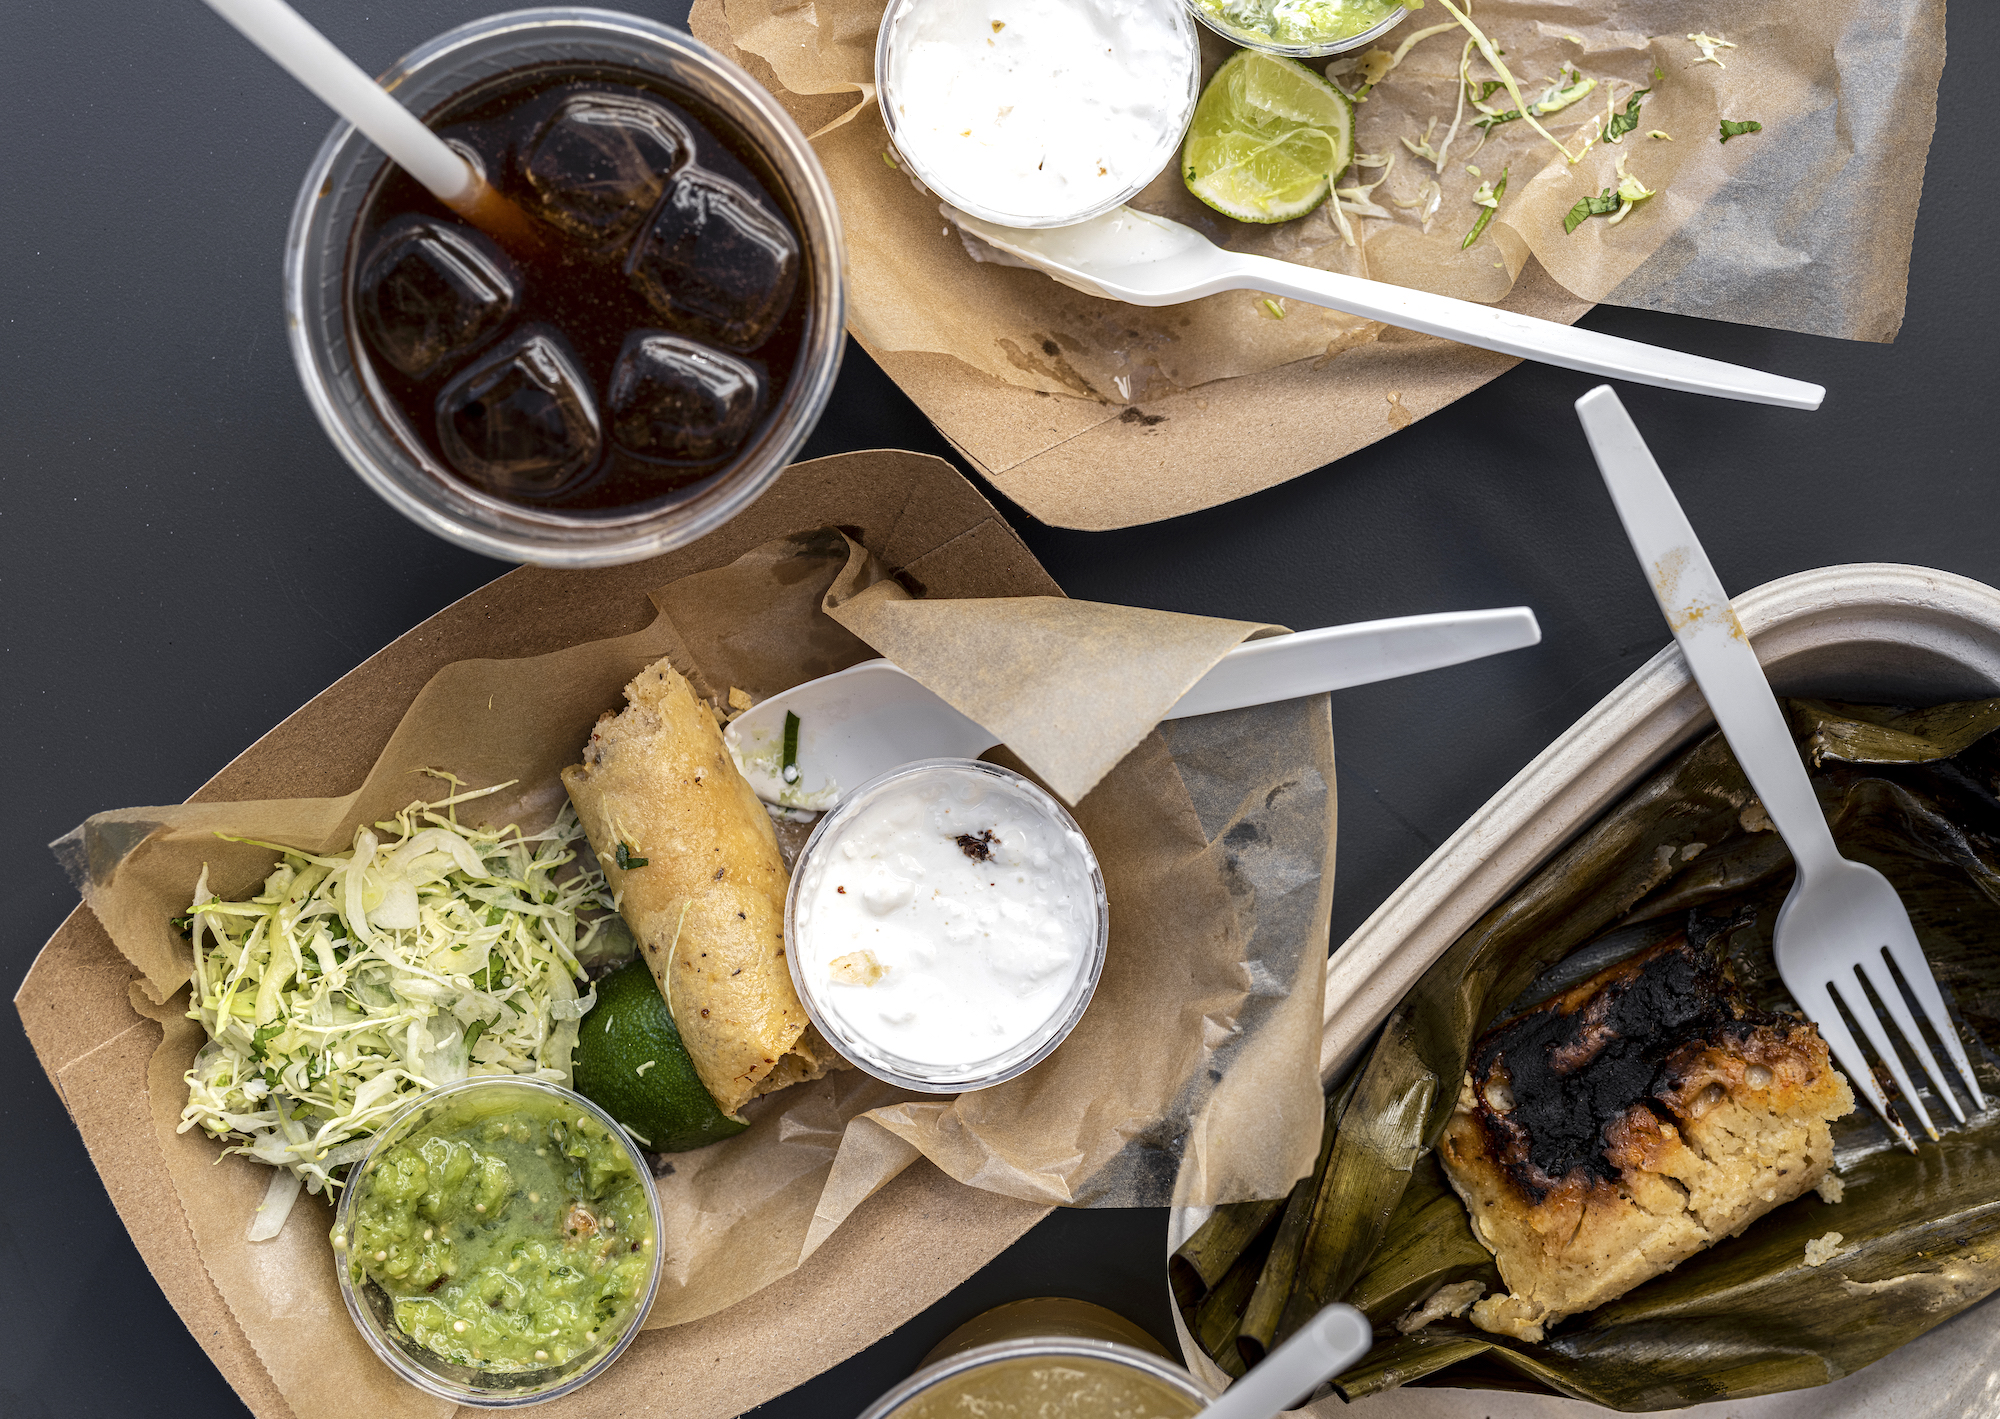 The fish flauta and other takeout favorites from Ditroit.